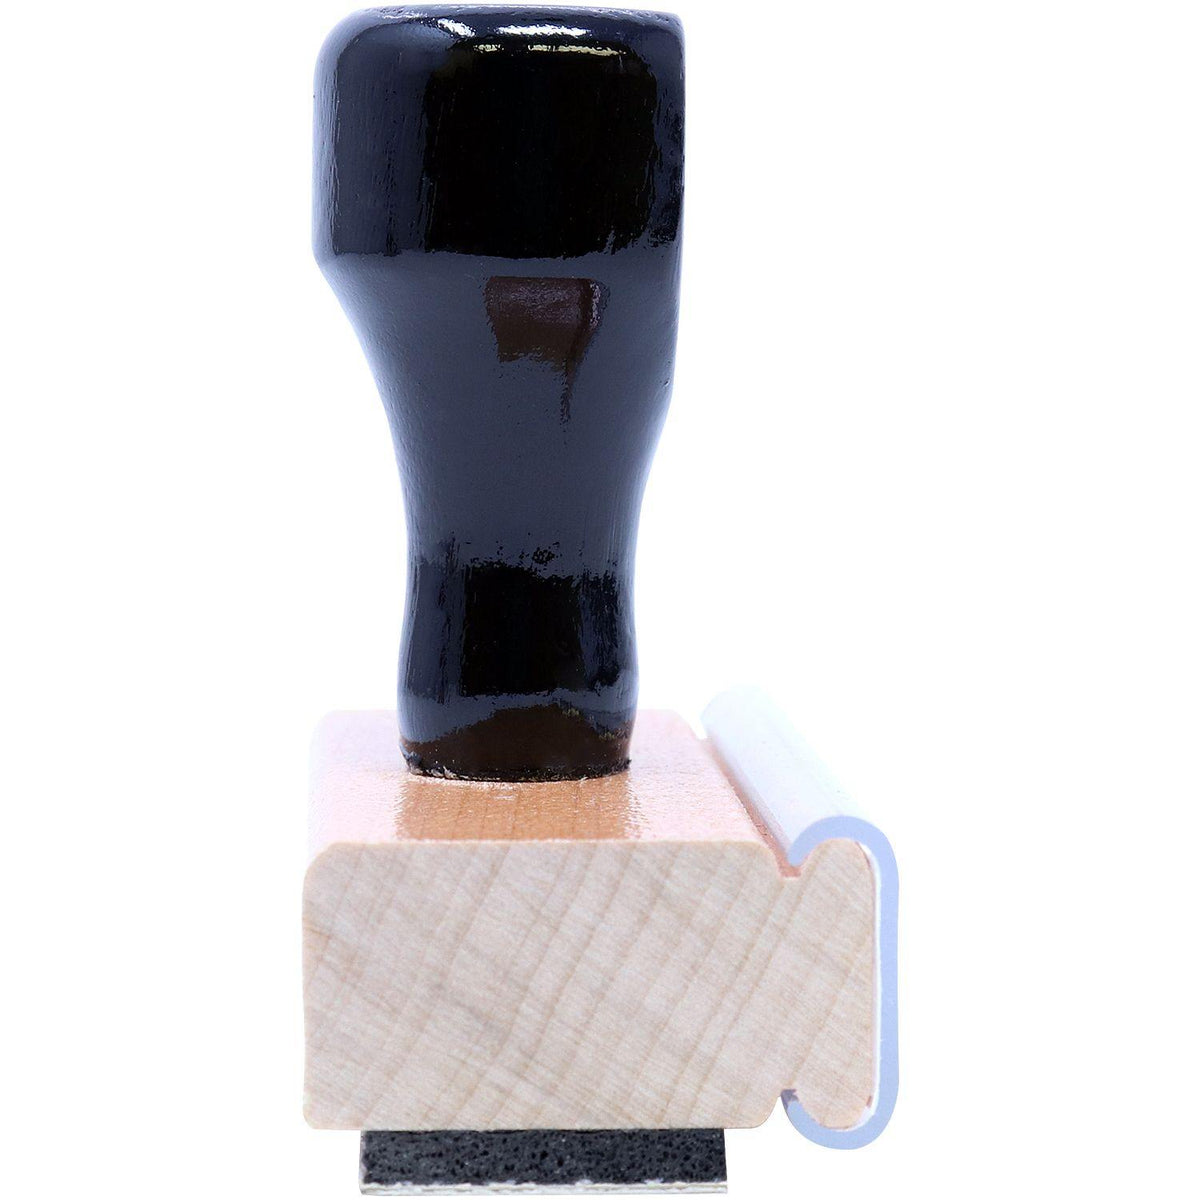 Notarize Rubber Stamp - Engineer Seal Stamps - Brand_Acorn, Impression Size_Small, Stamp Type_Regular Stamp, Type of Use_Professional